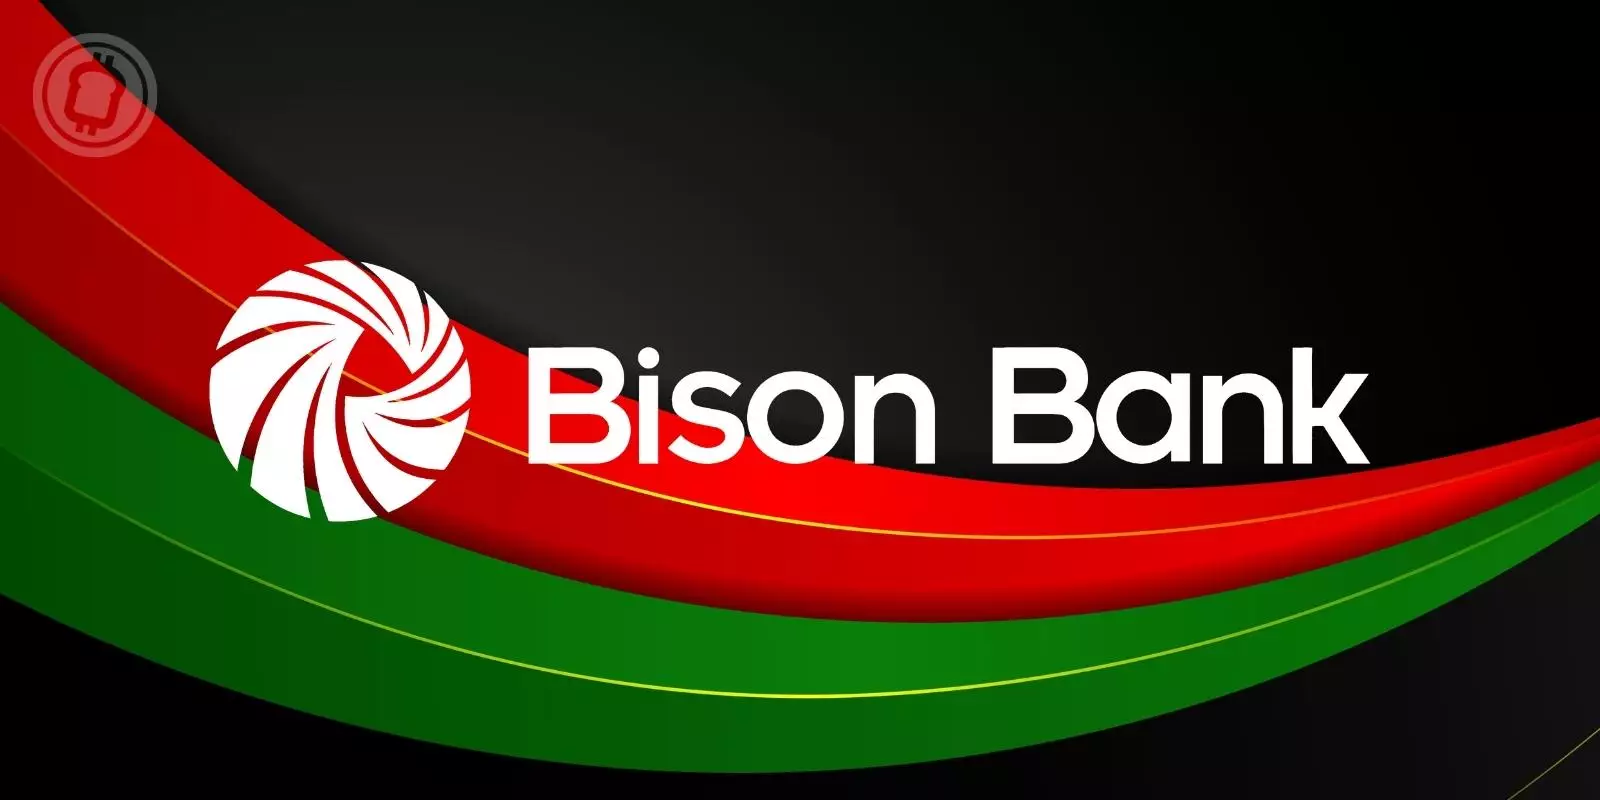 Bison Bank Premiere Banque Licence Crypto Portugal